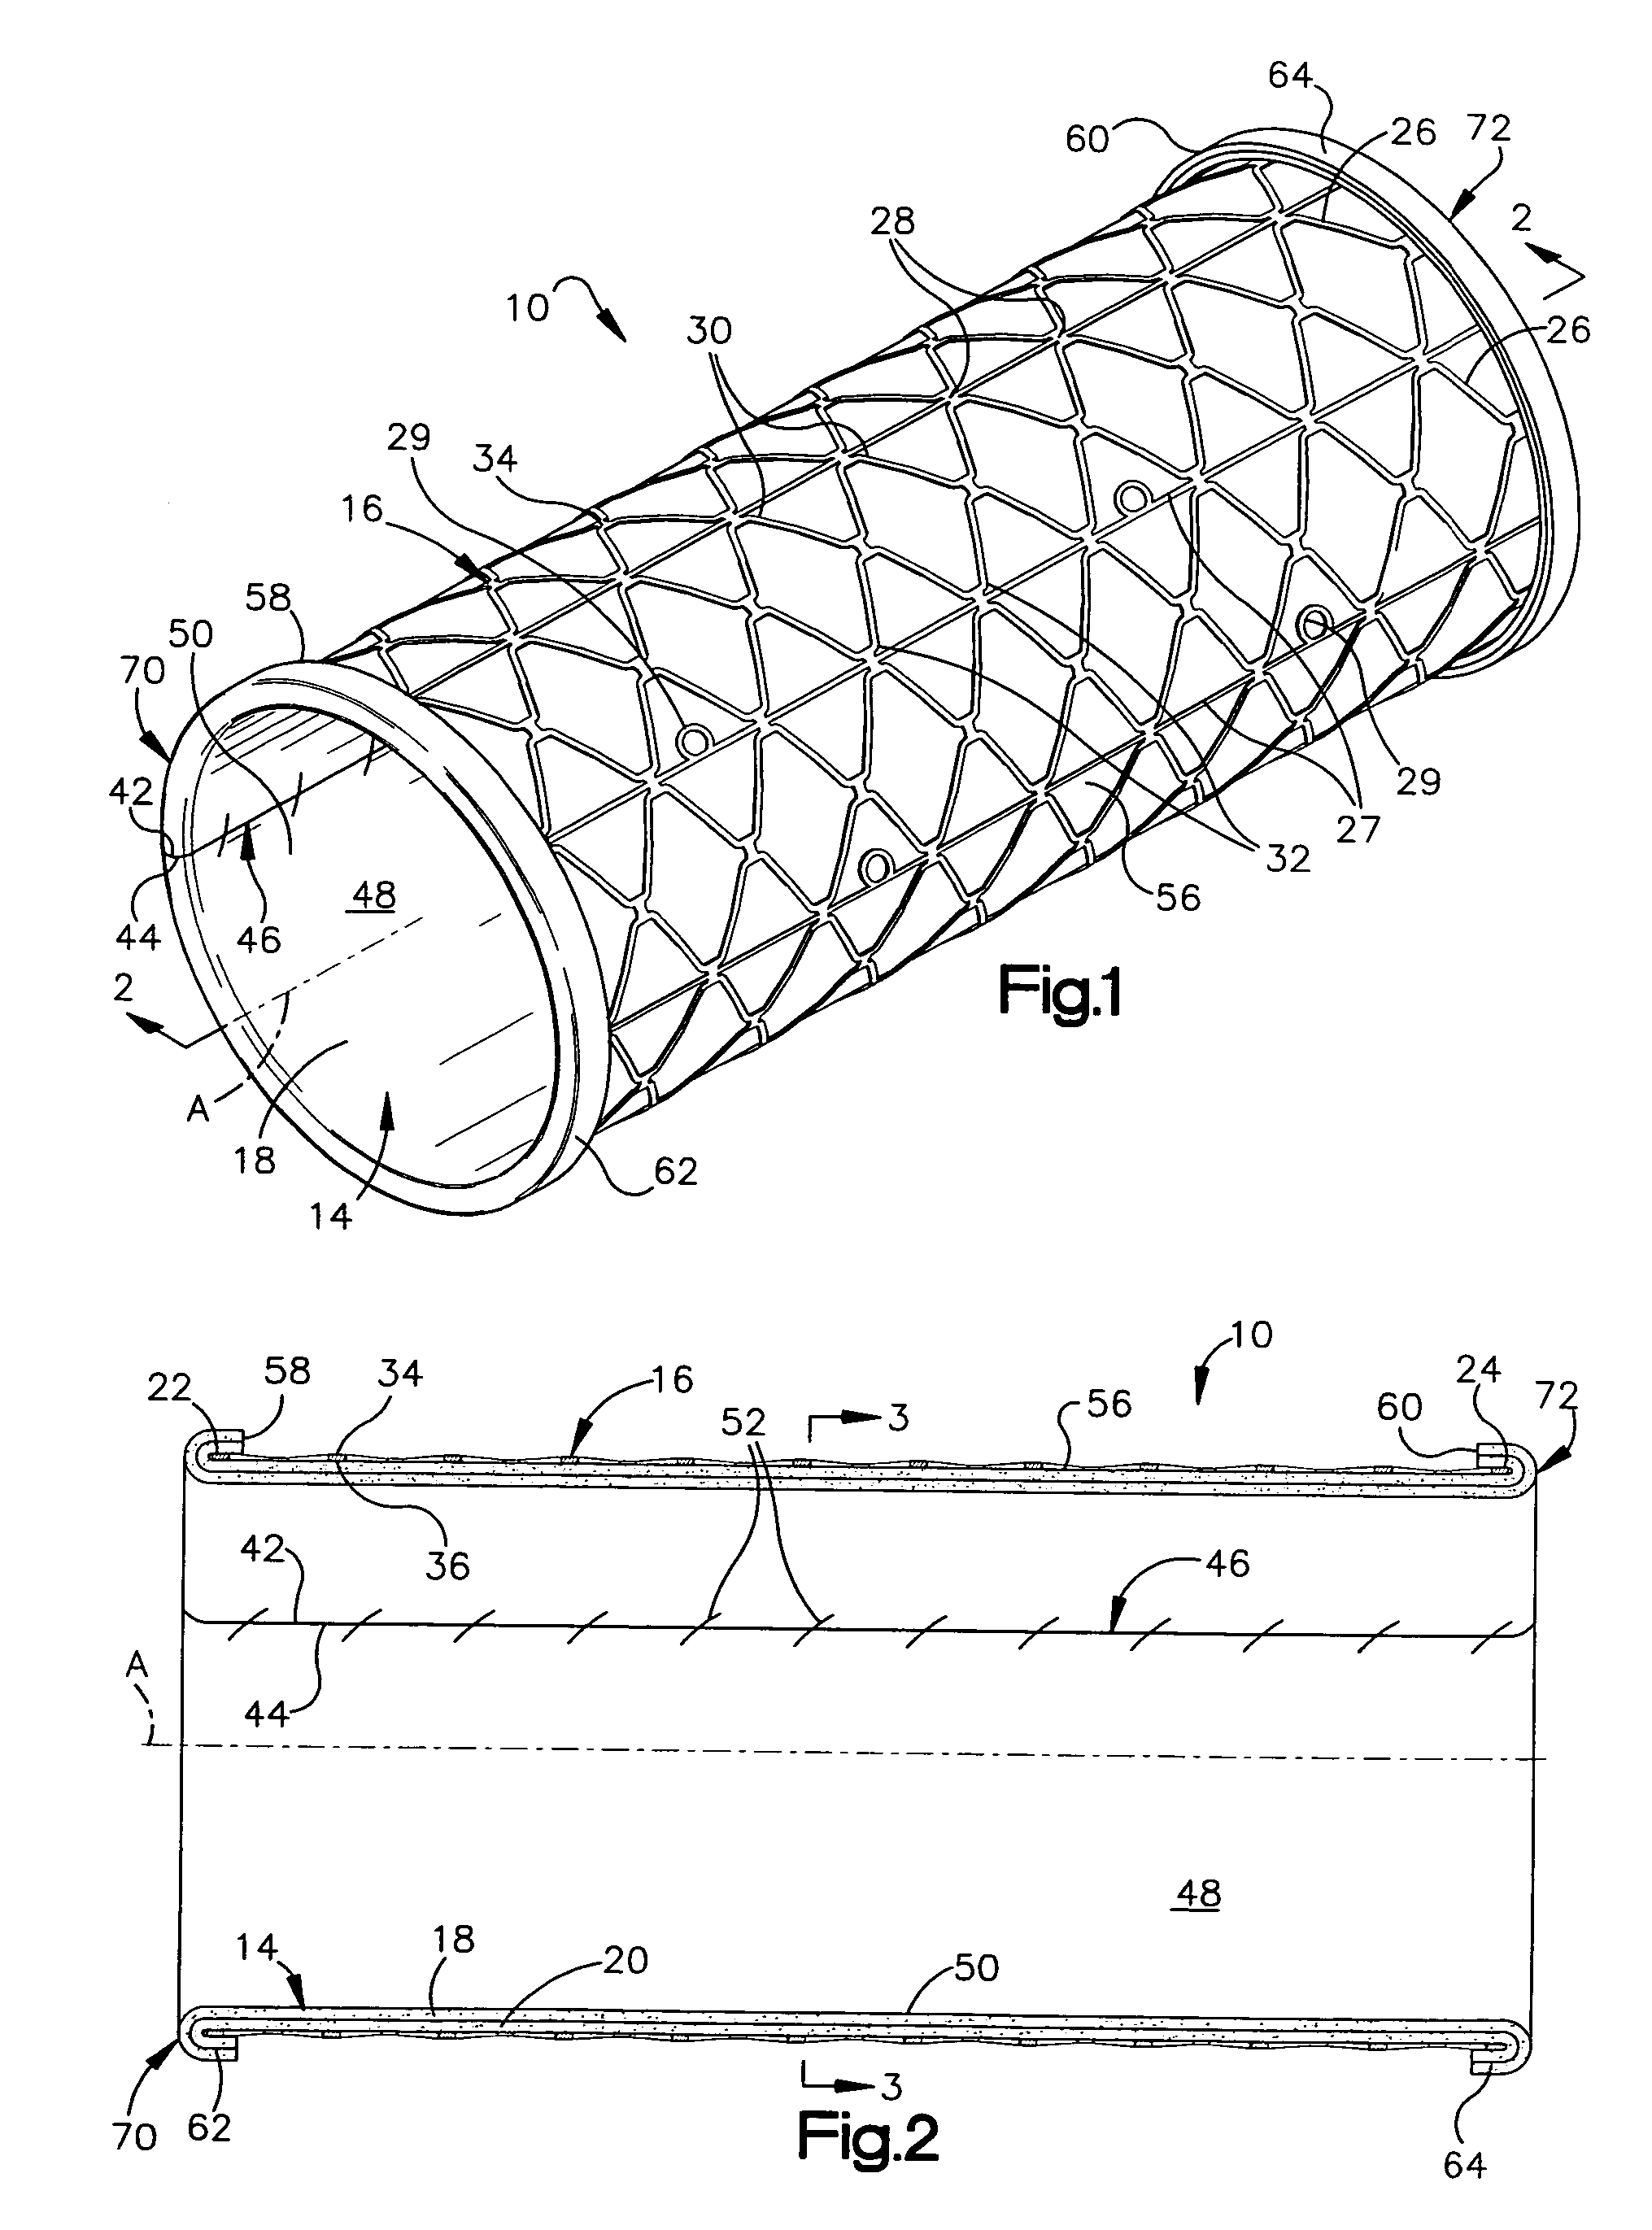 Prosthetic cardiac value and method for making same